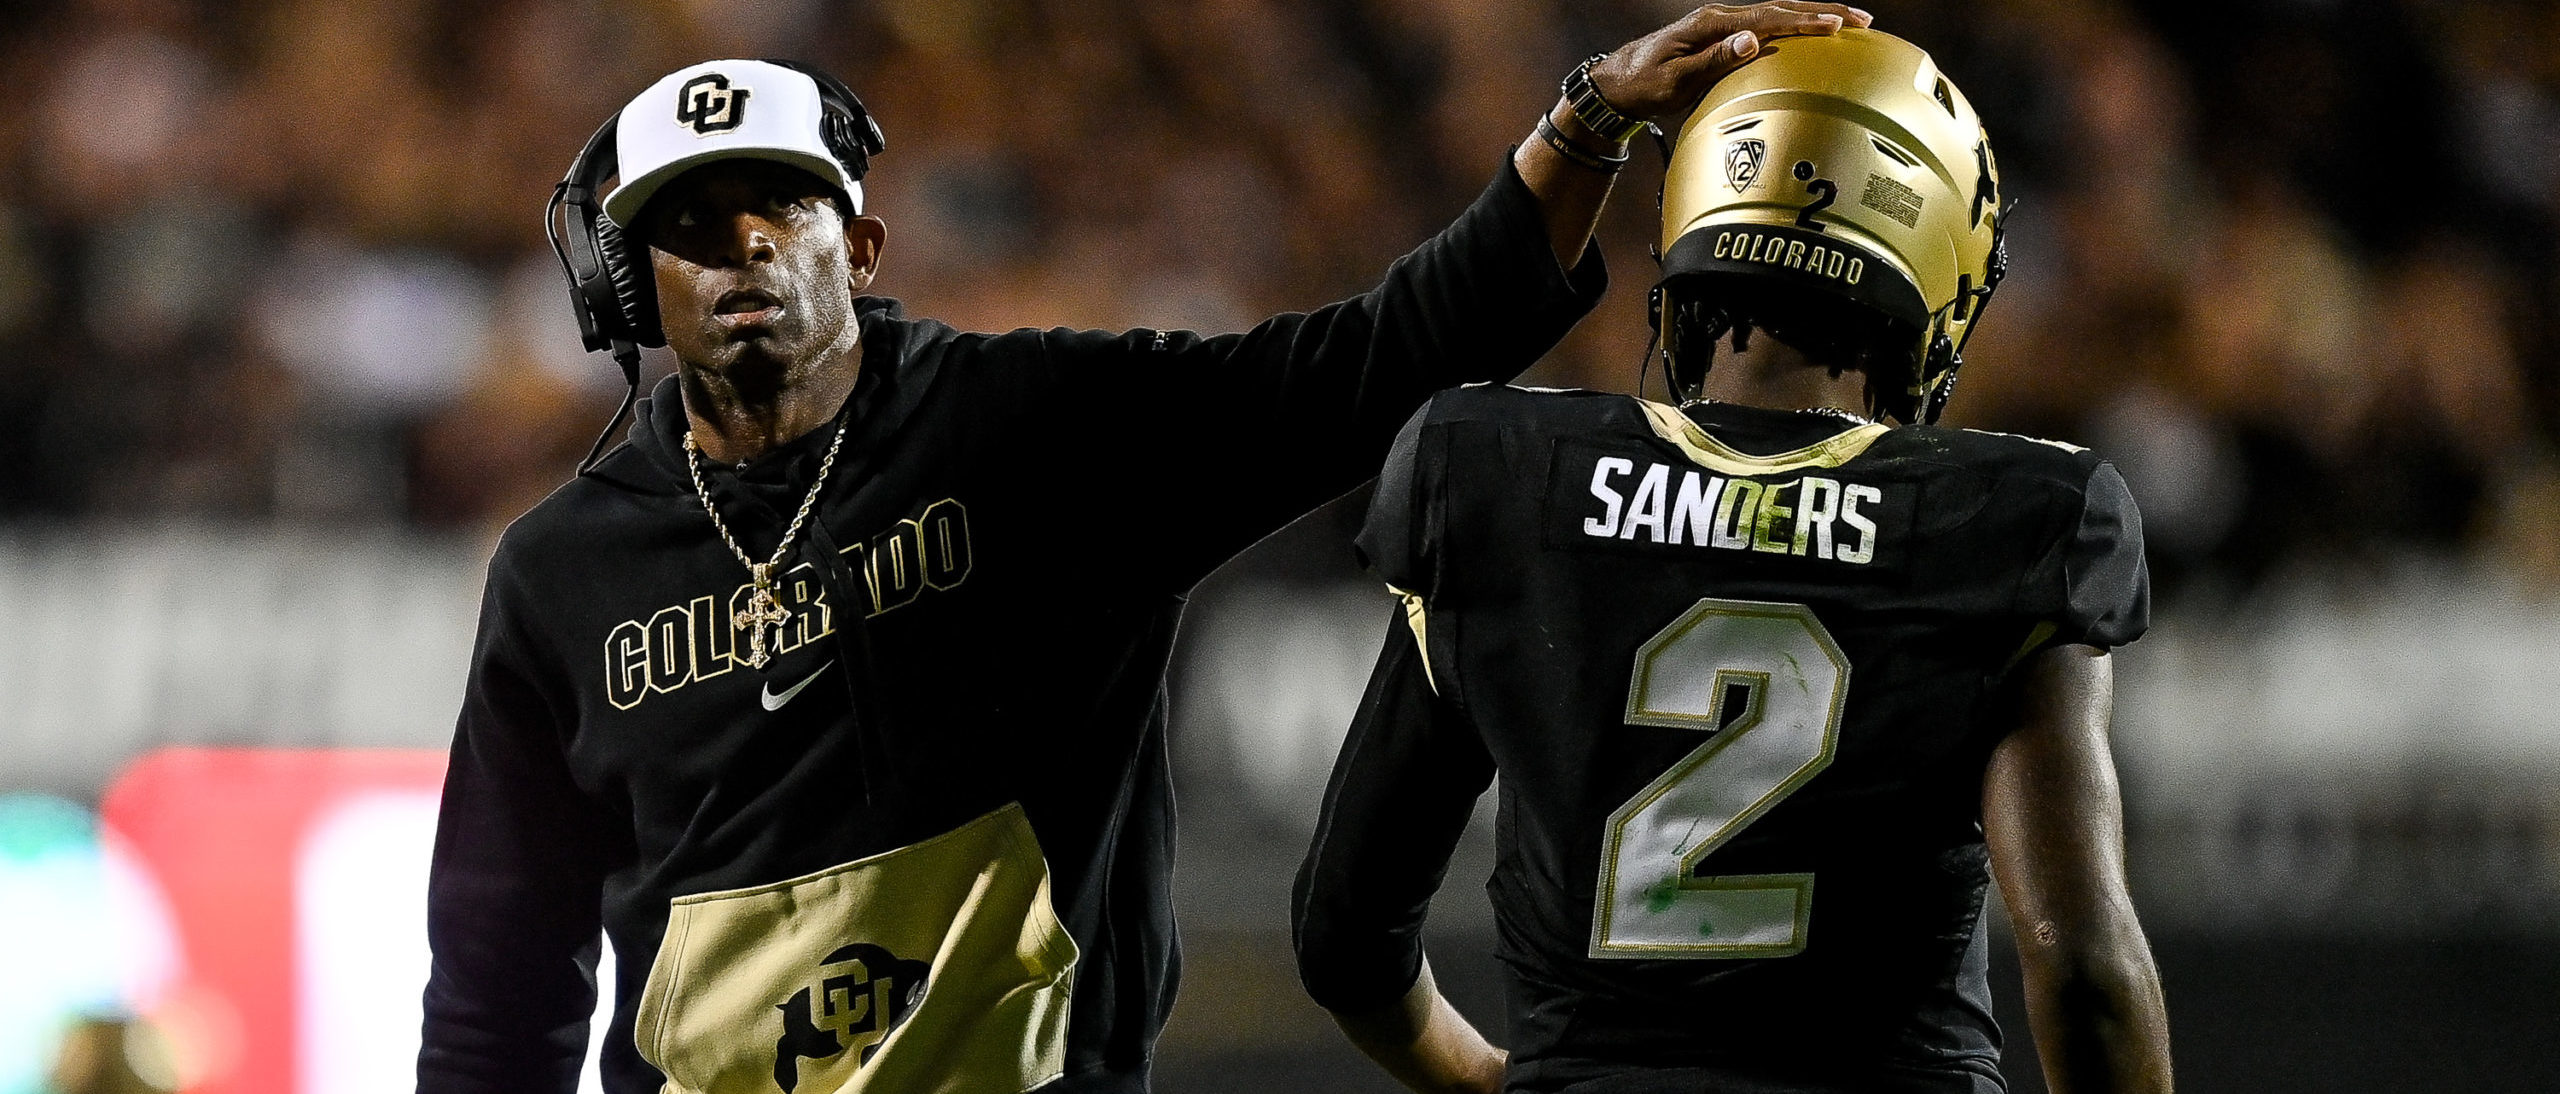 Deion Sanders Continues To Prove He’s Mr. Midas Touch As Colorado-Colorado State Pulls In Record-Breaking TV Ratings